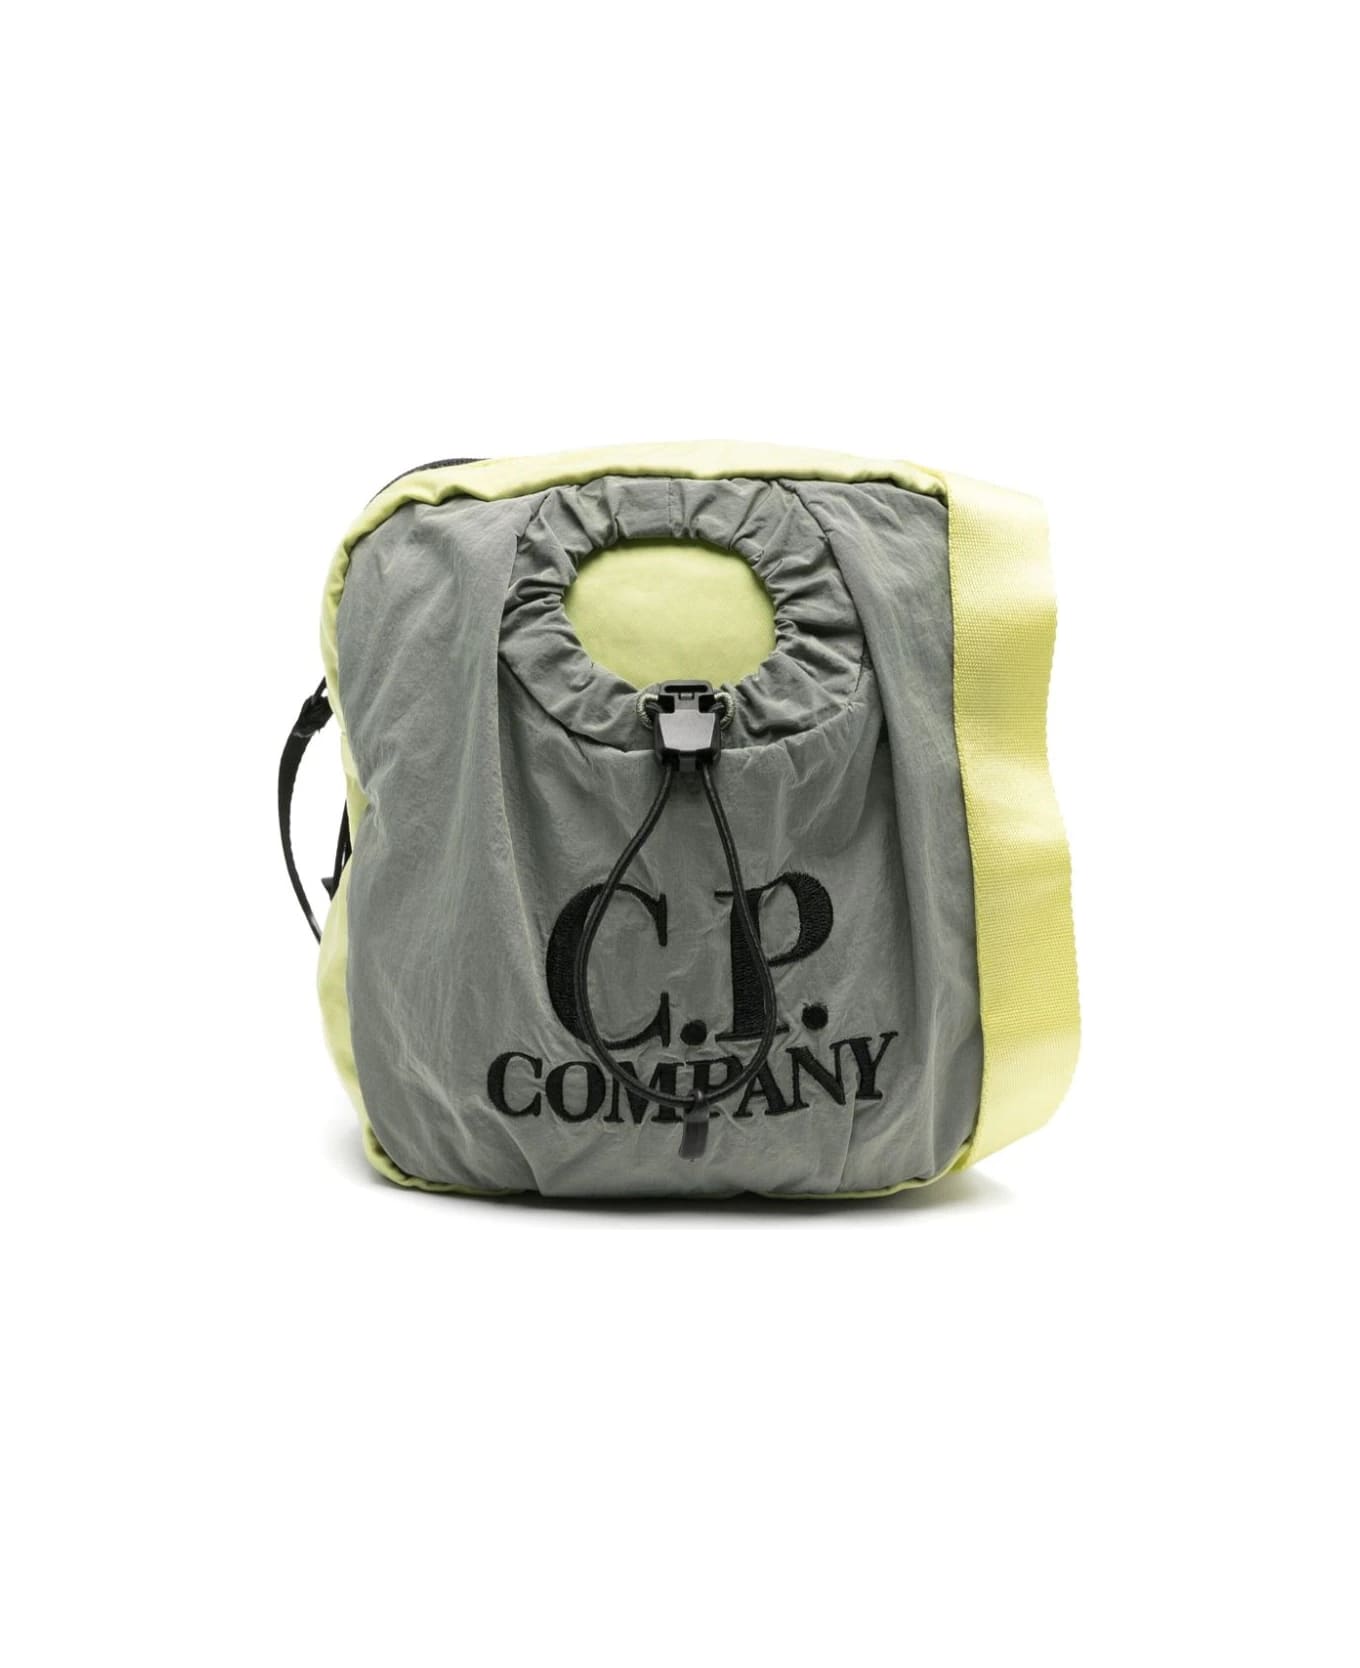 C.P. Company Undersixteen Shoulder Bag With Embroidery - Green